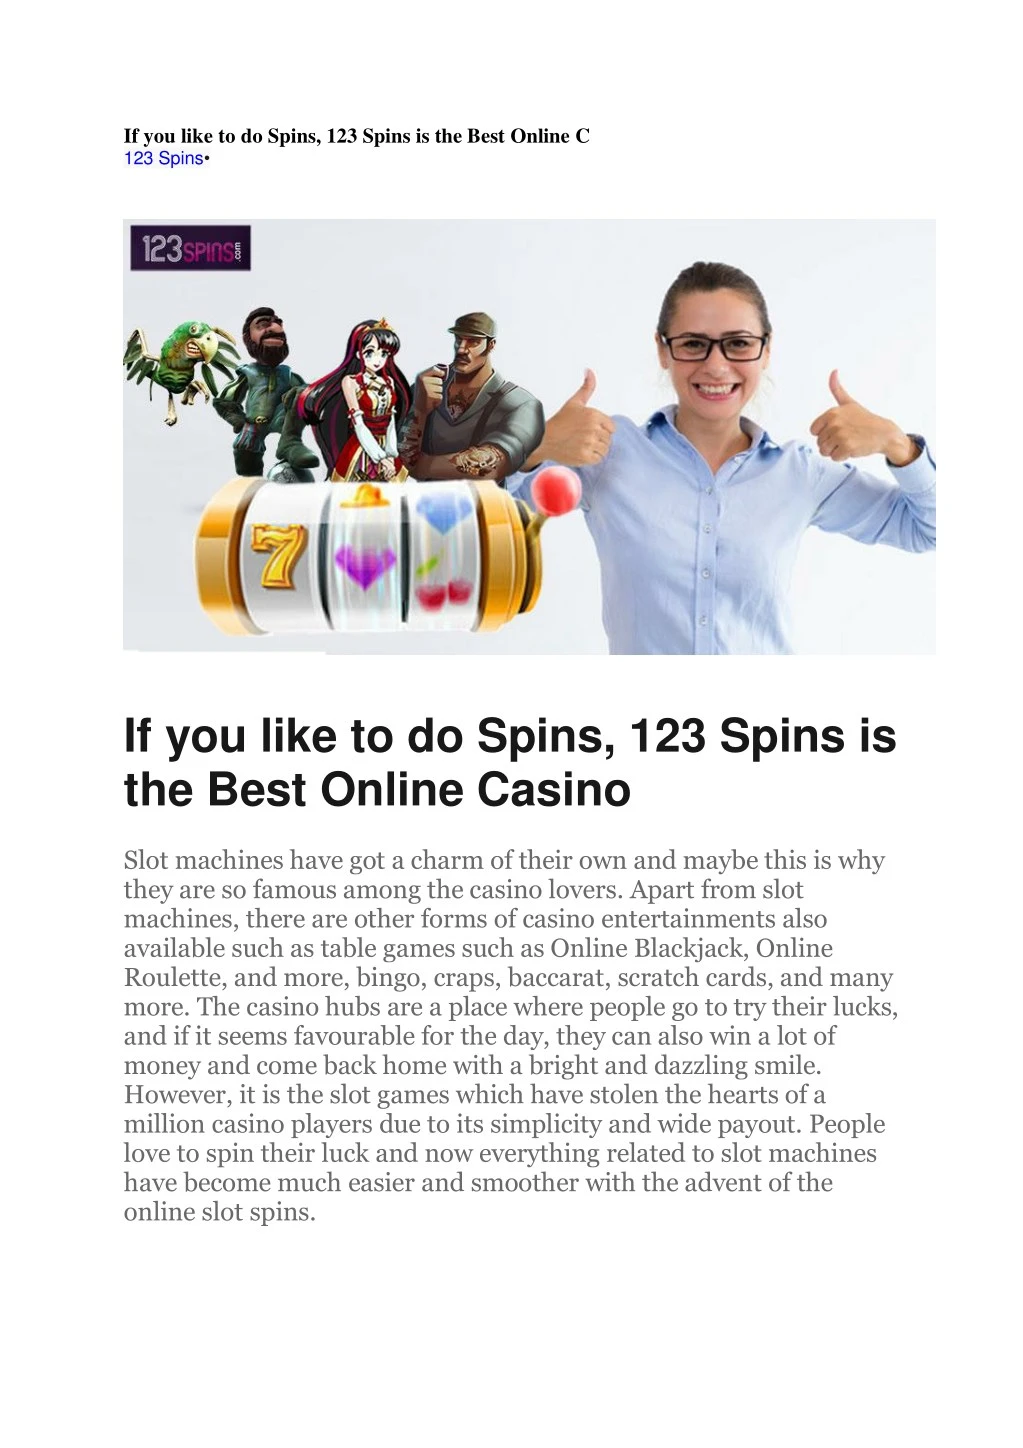 if you like to do spins 123 spins is the best